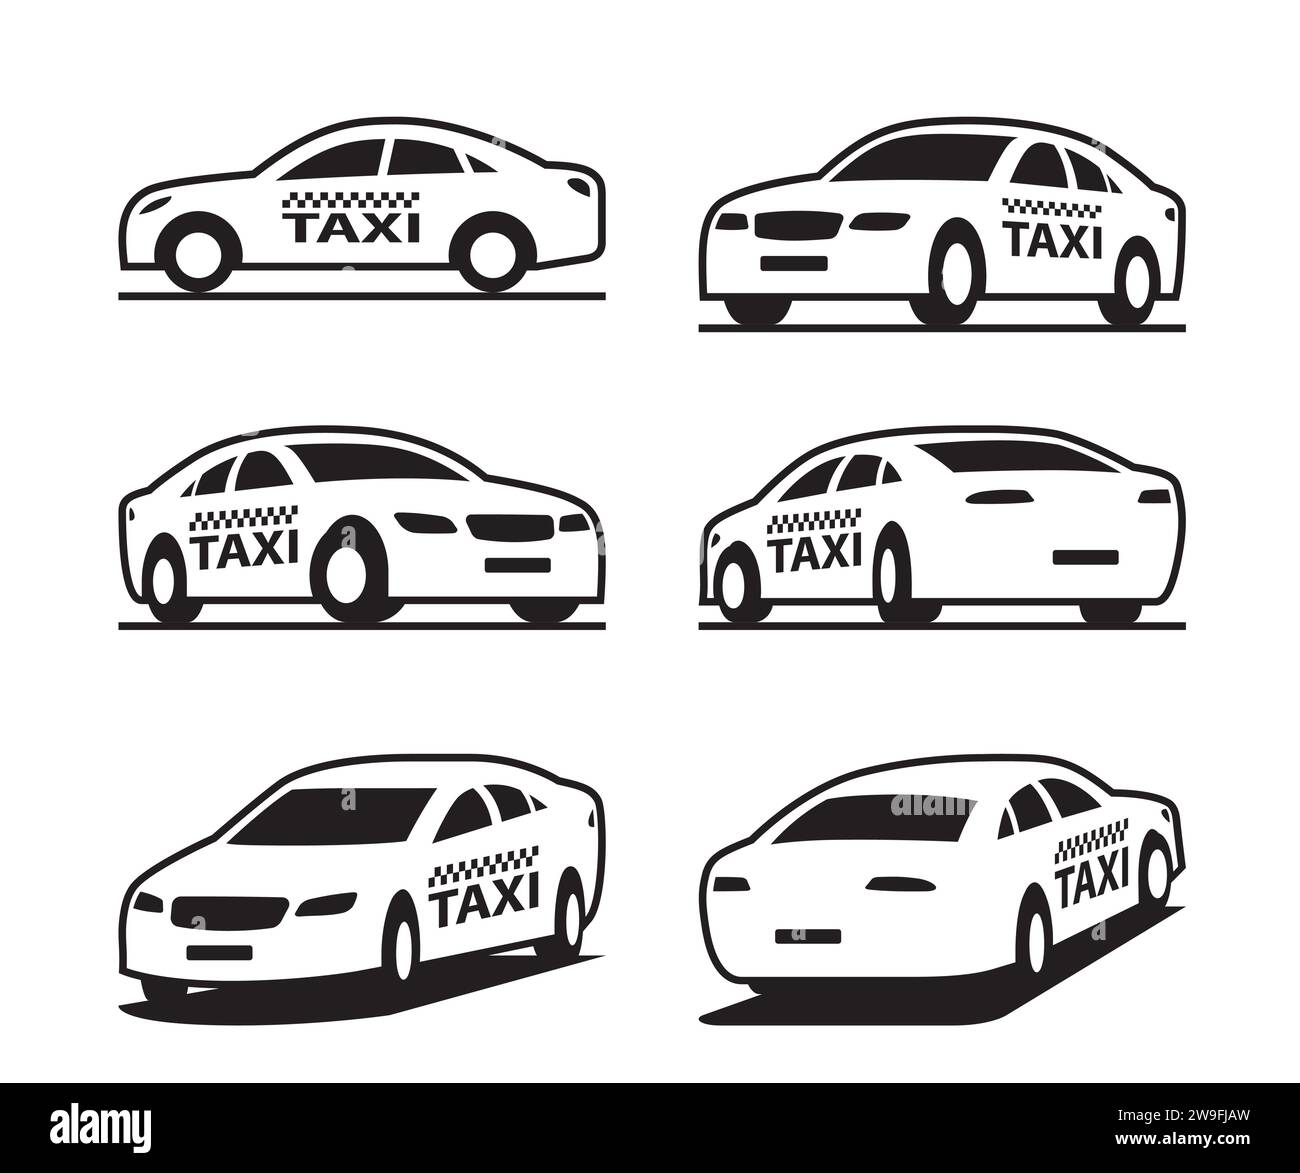 Taxi car in different perspective - vector illustration Stock Vector